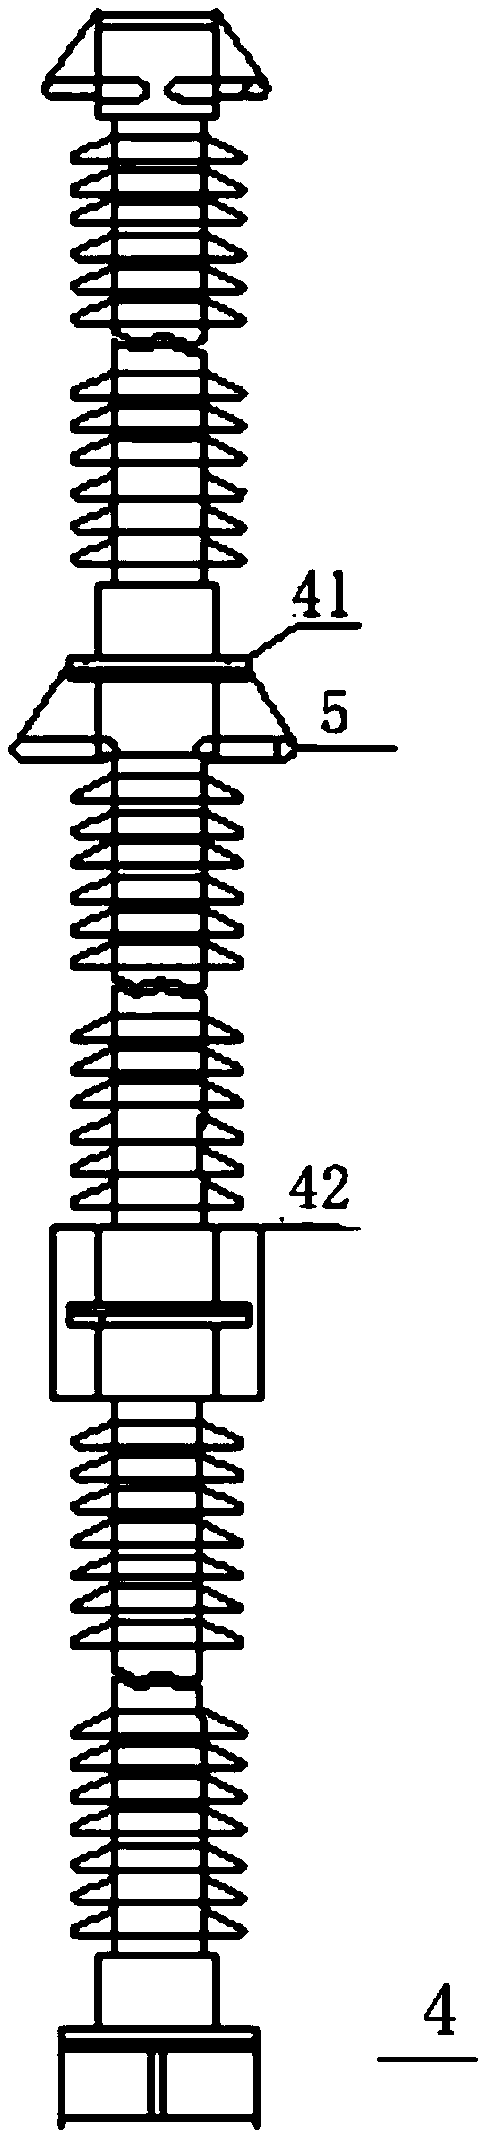 Support and shielding structure for dry type air reactor